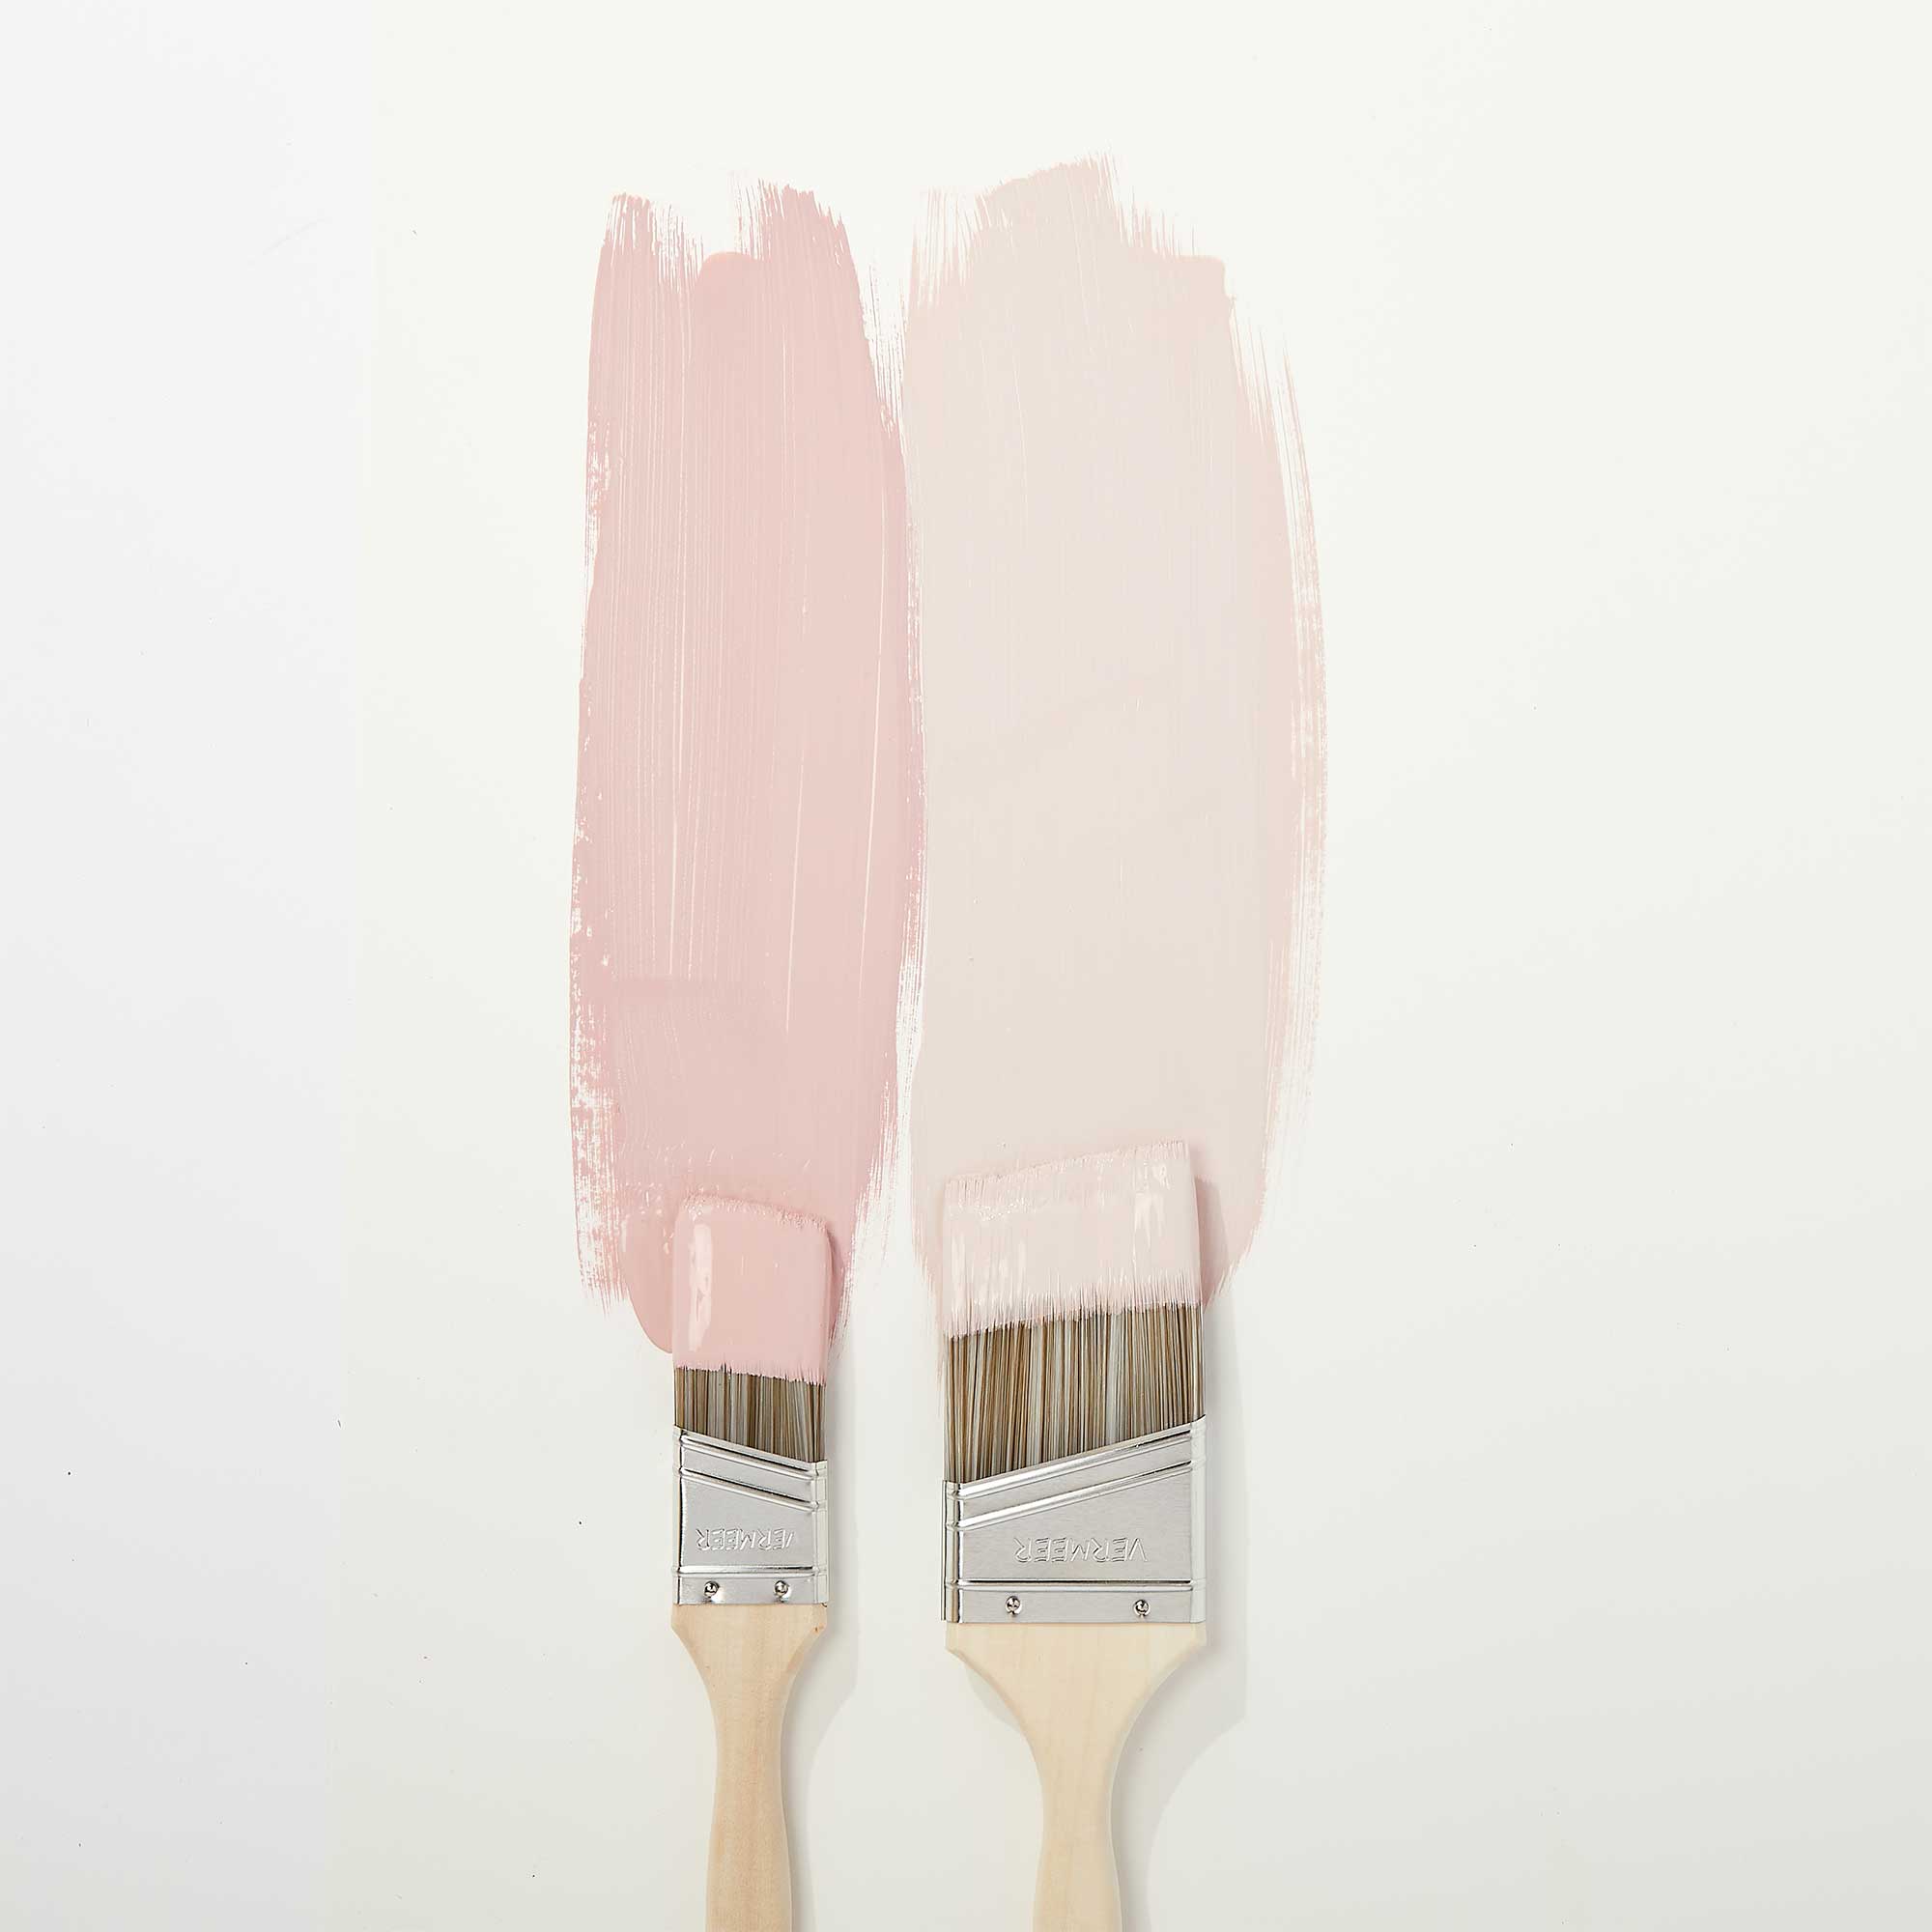 Paint Brushes with Pink Paint on Wall